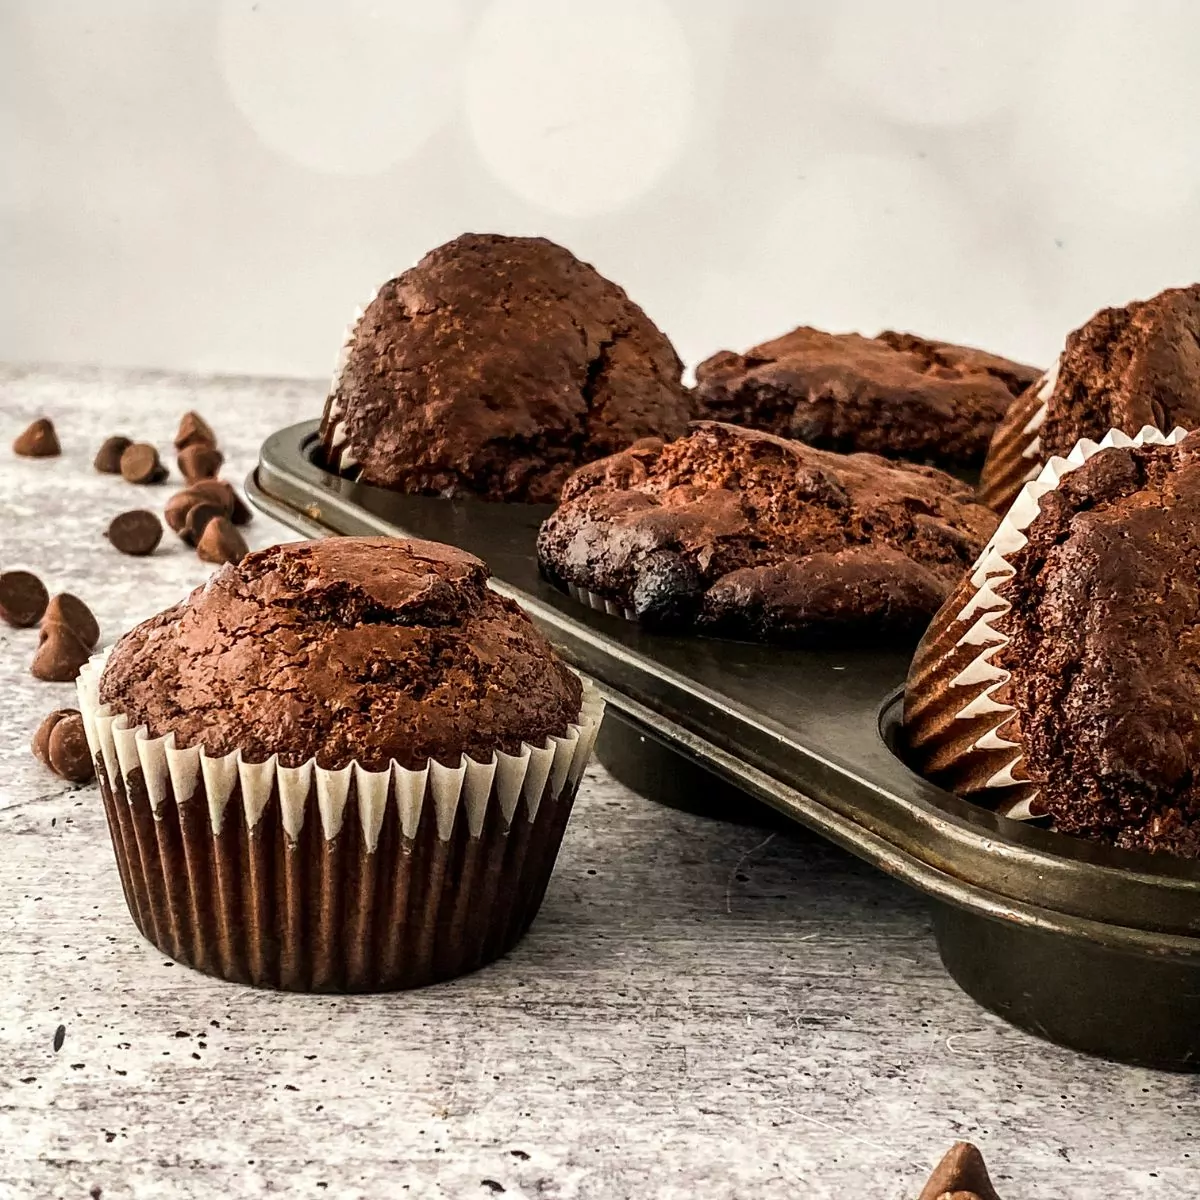 bakery style chocolate chip muffins.